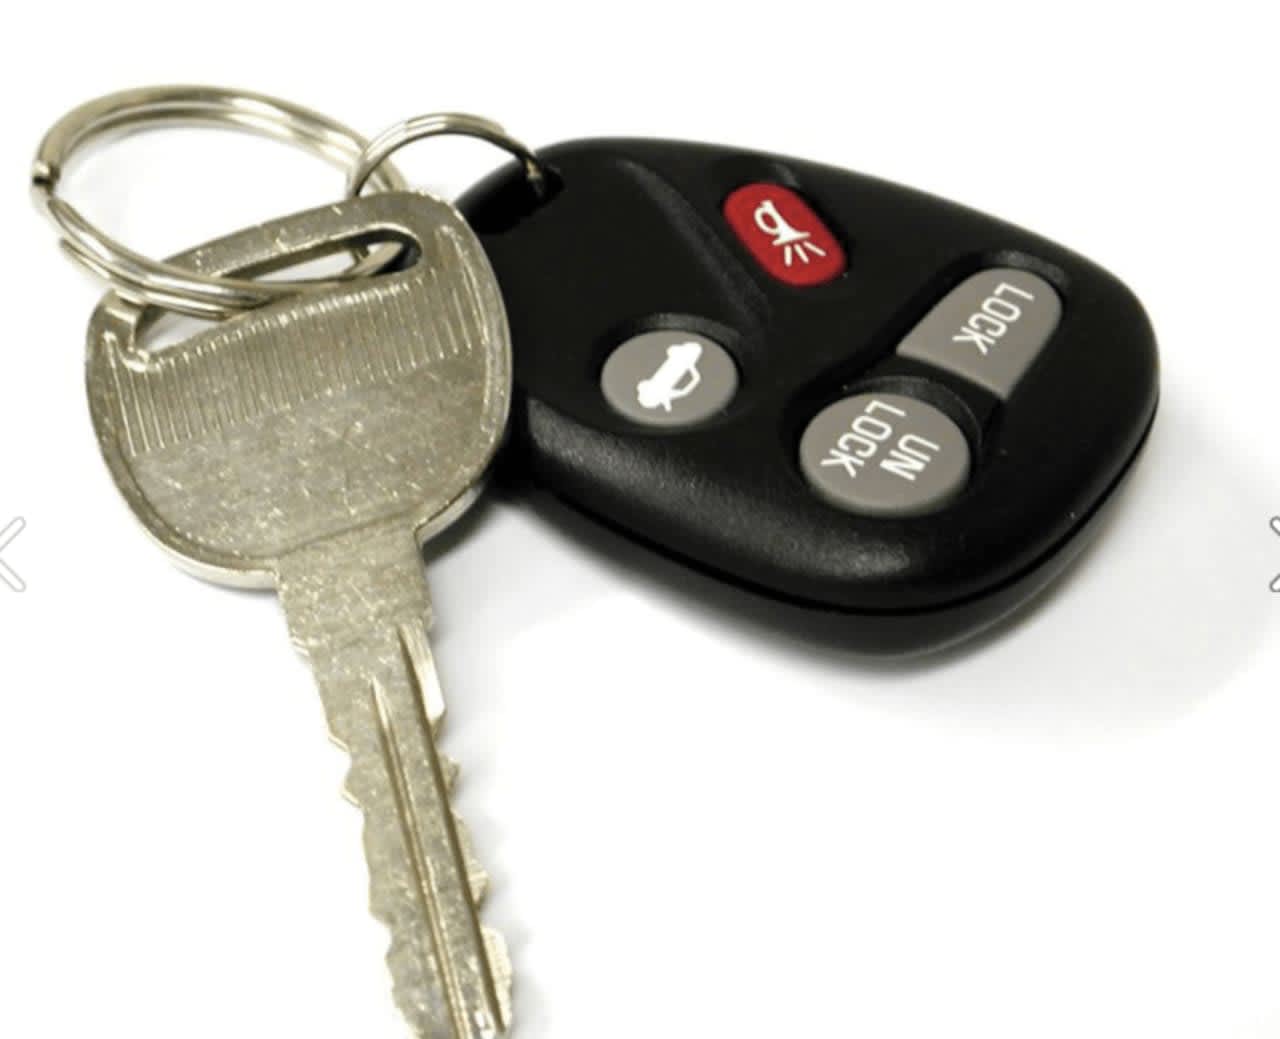 Easton Police reminded drivers and residents to take keys and other belongings from their cars after a recent "uptick" in thefts.